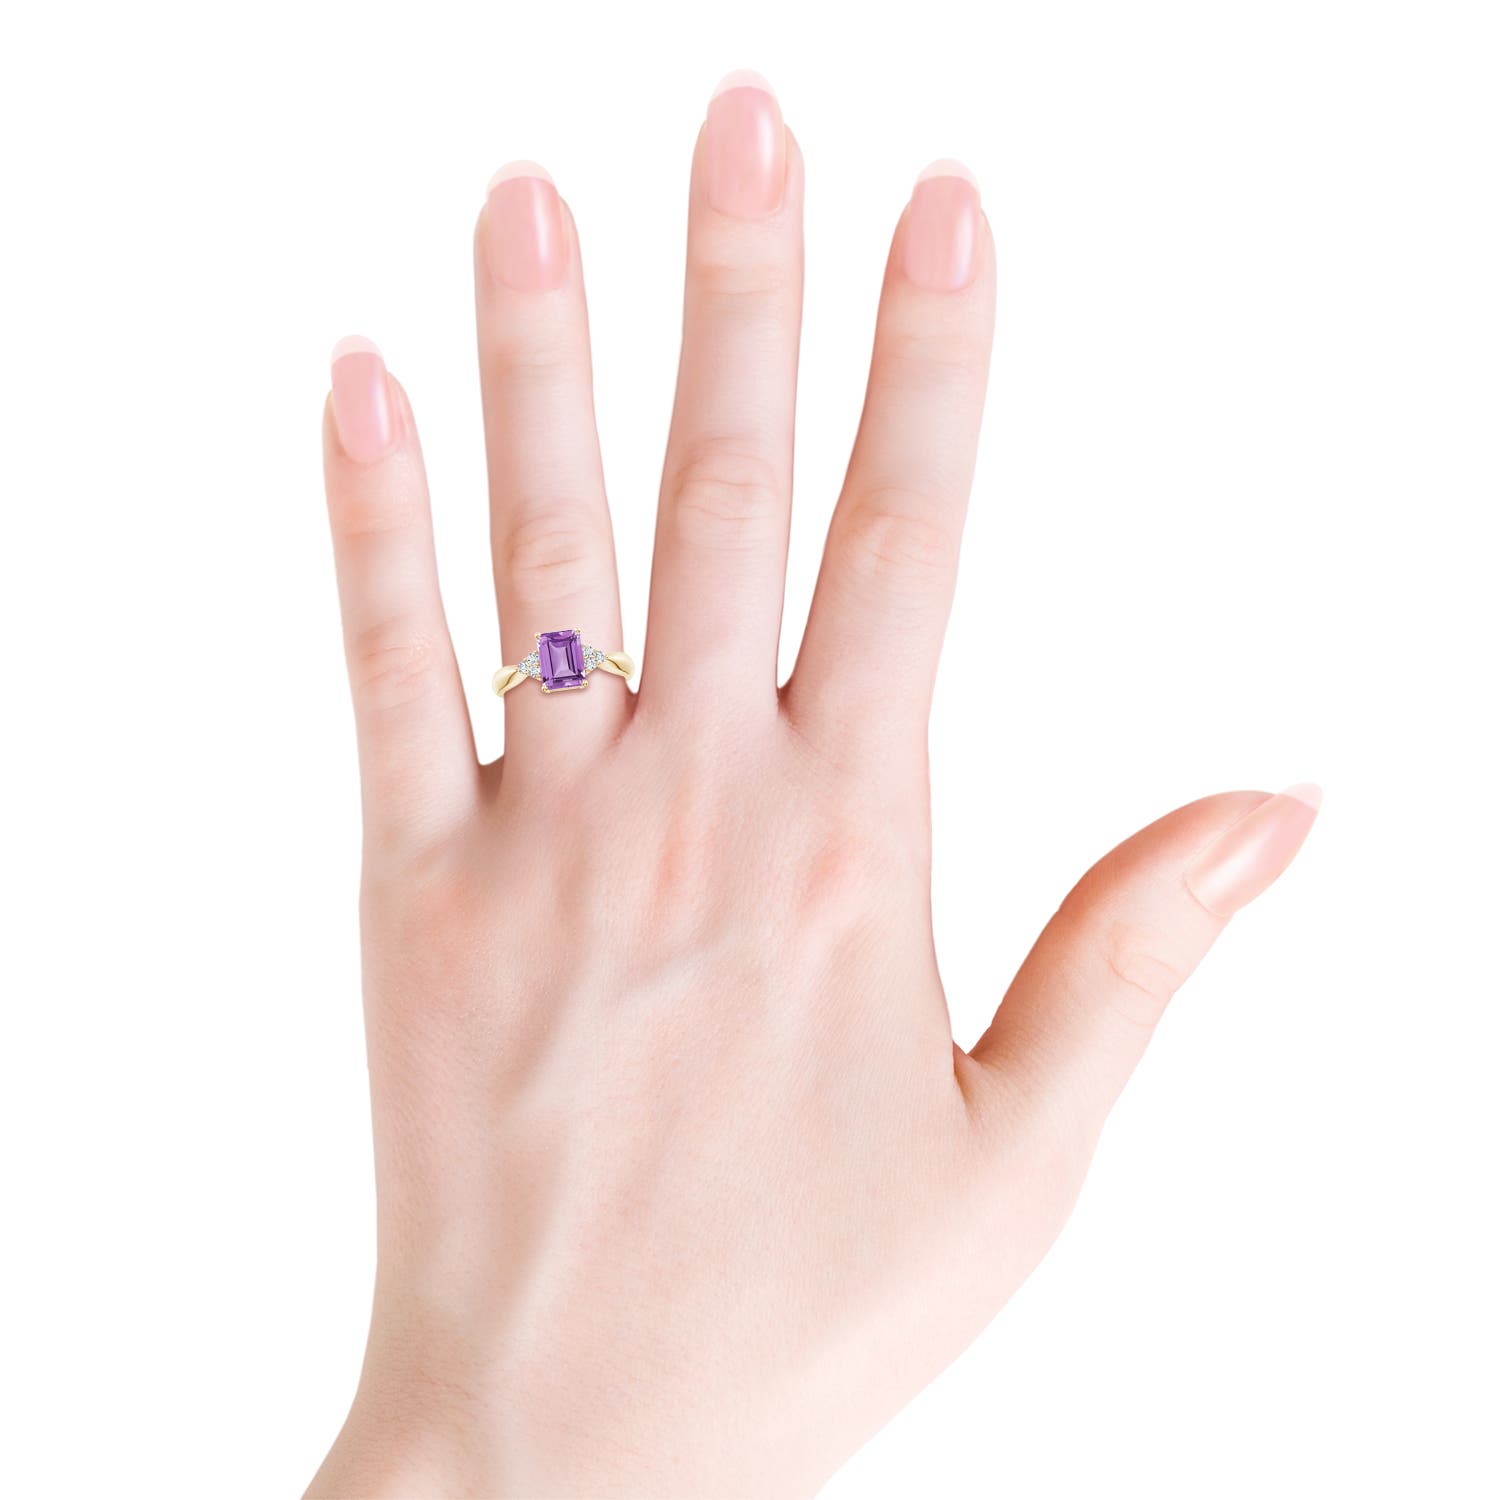 A - Amethyst / 1.67 CT / 14 KT Yellow Gold